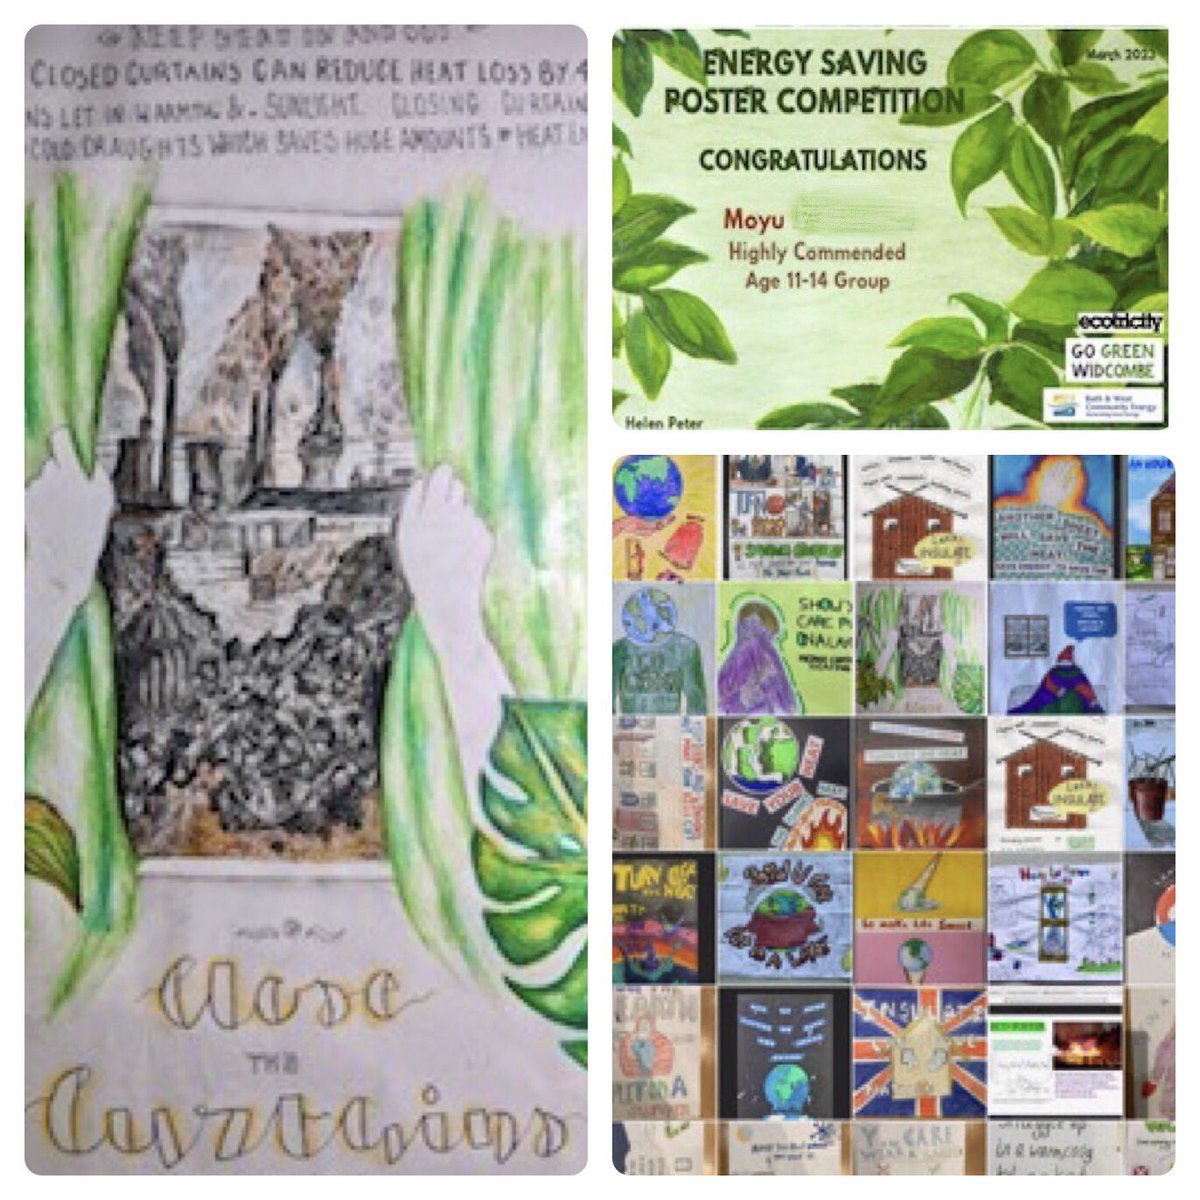 Congratulations to Moyu in Year 7 on receiving #highlycommended in the #gogreenwidcome @ecotricity #ecoposter competition 🌱 #everythingispossible